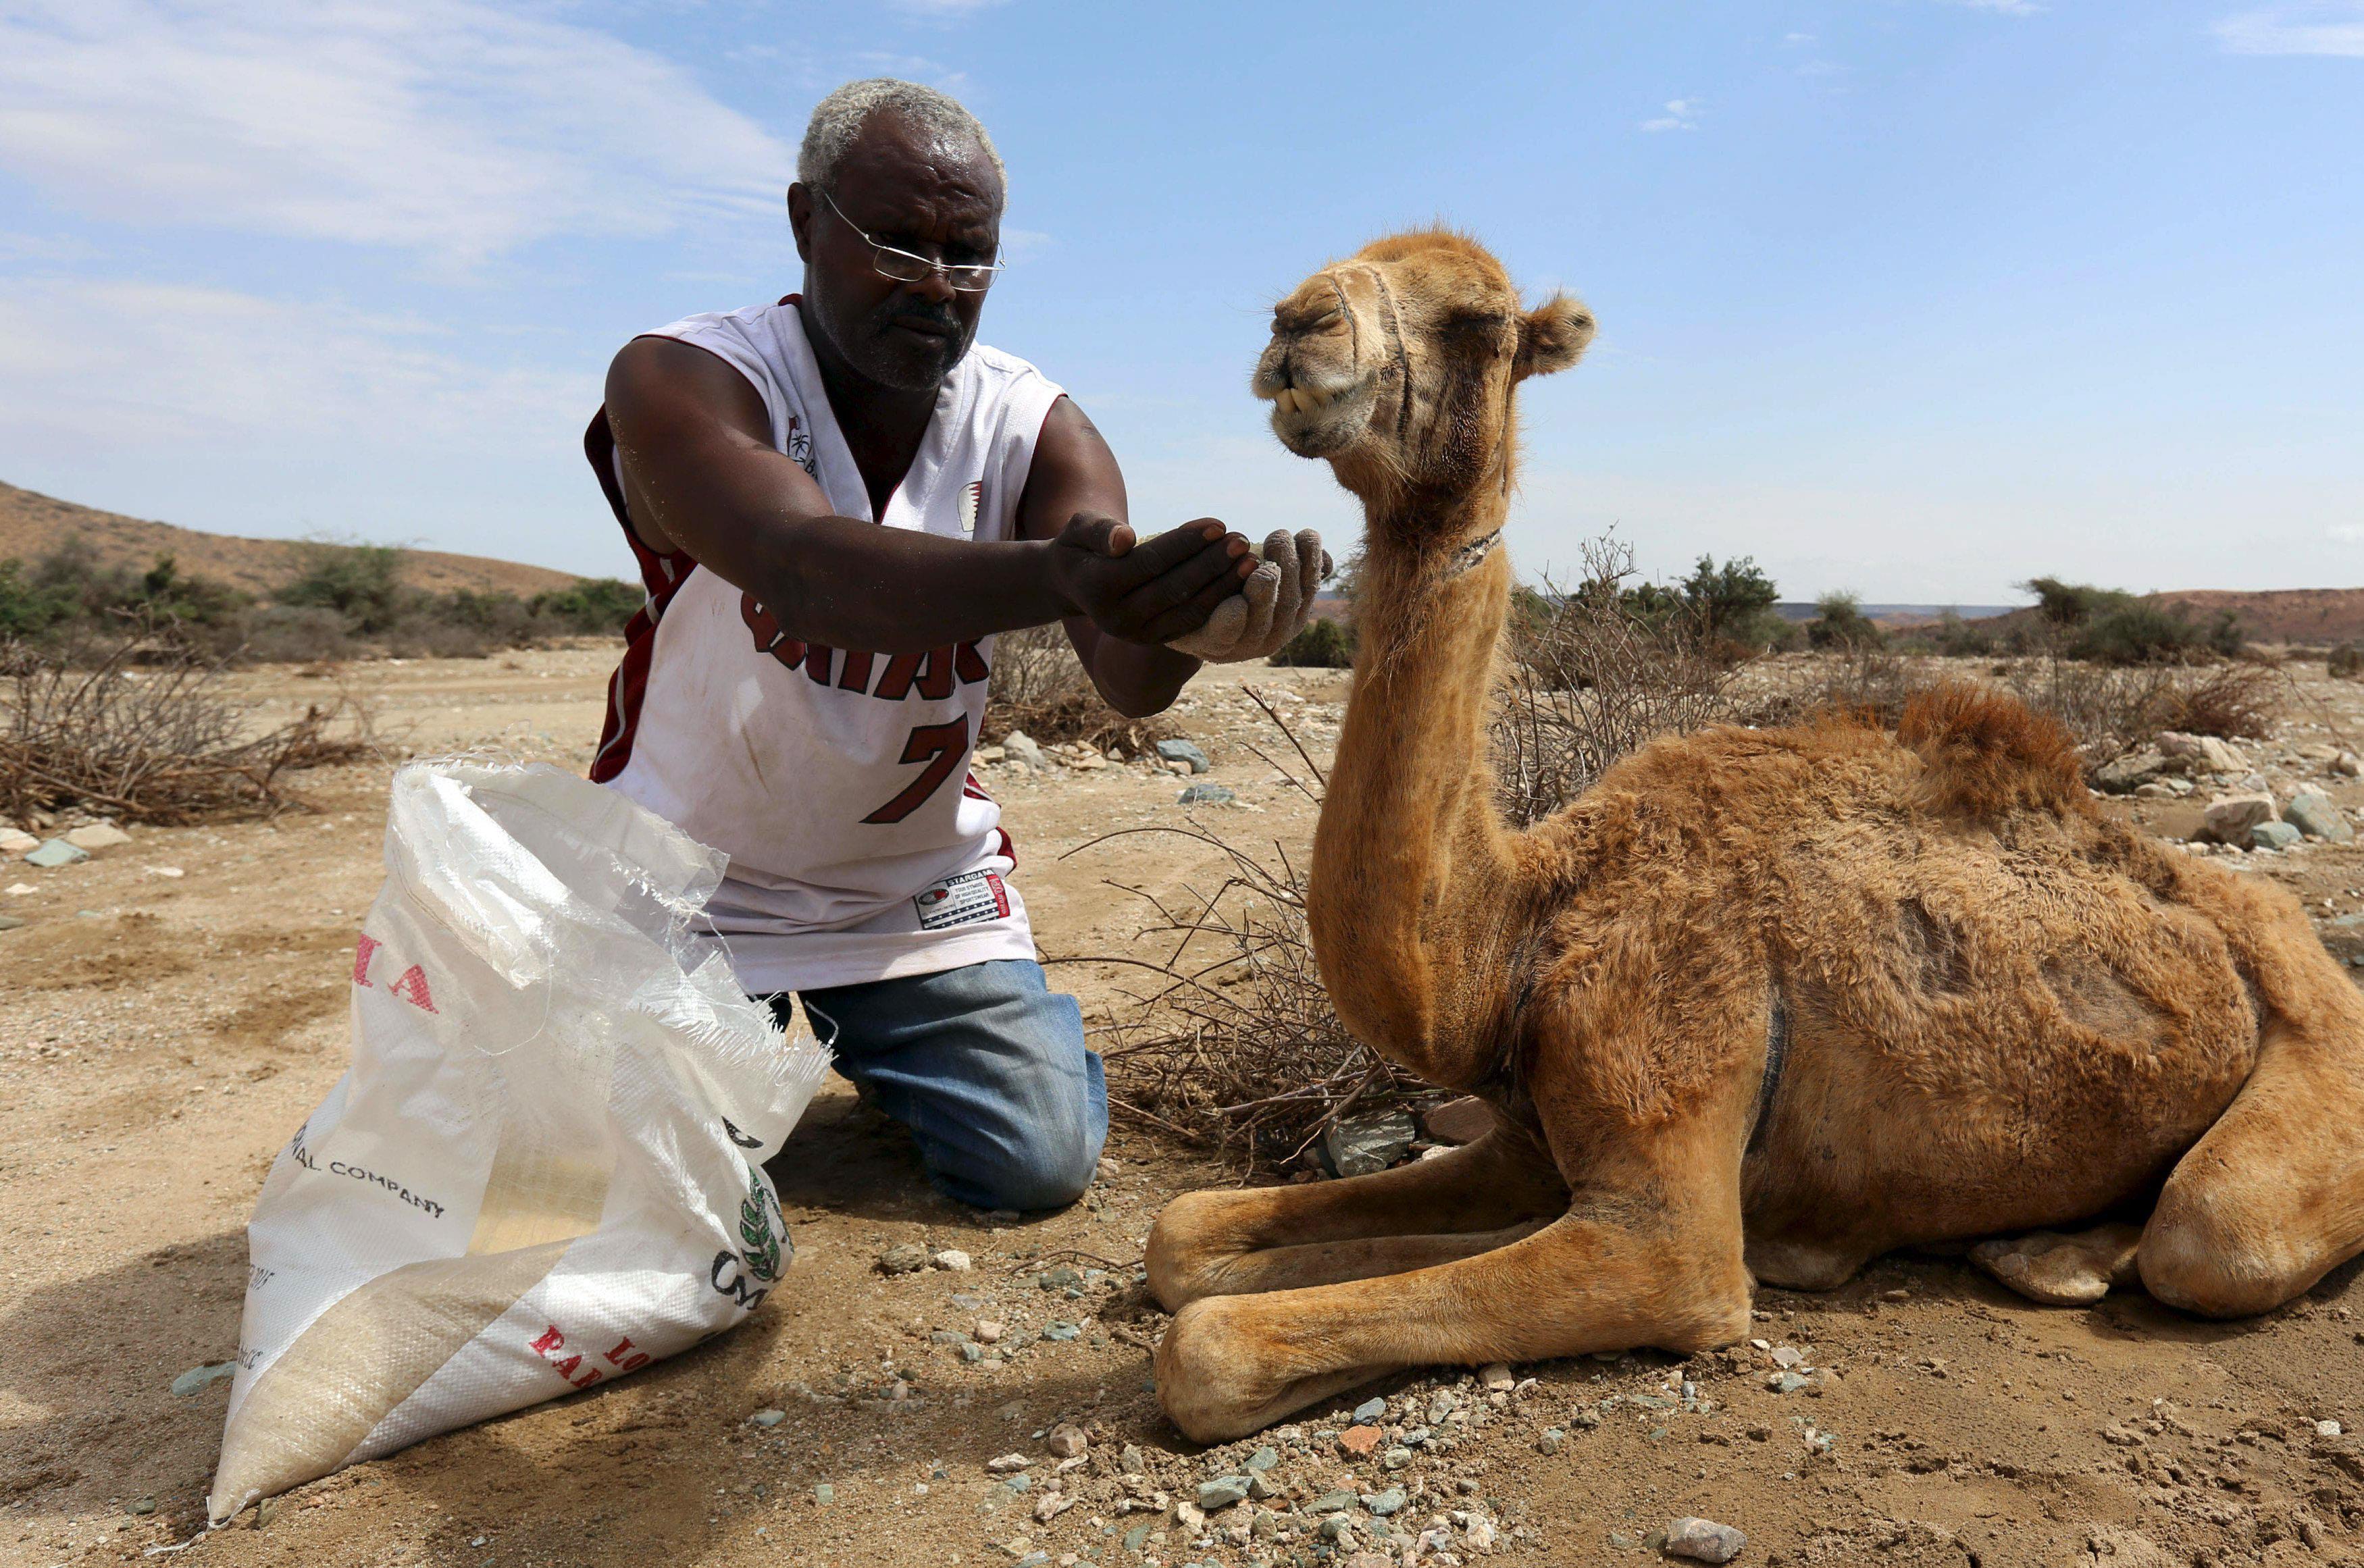 The Wider Image: Struggle for survival in Somaliland